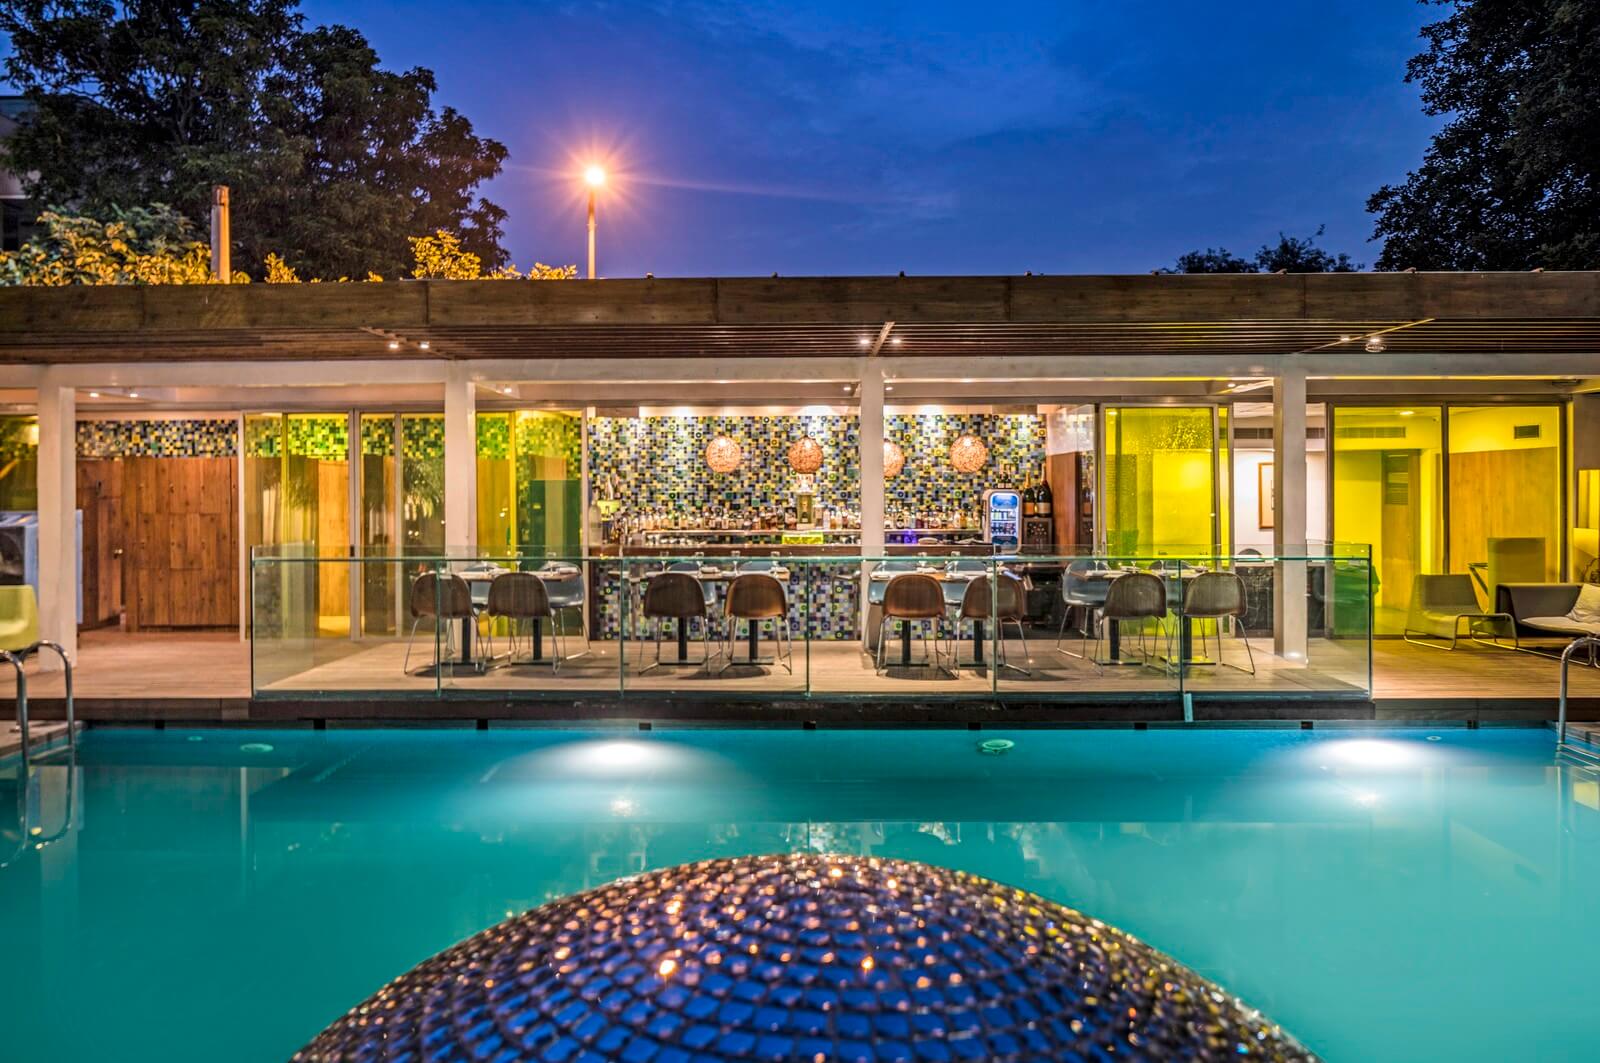 Bar with Seating Area and Outdoor Pool at Aqua, The park New Delhi